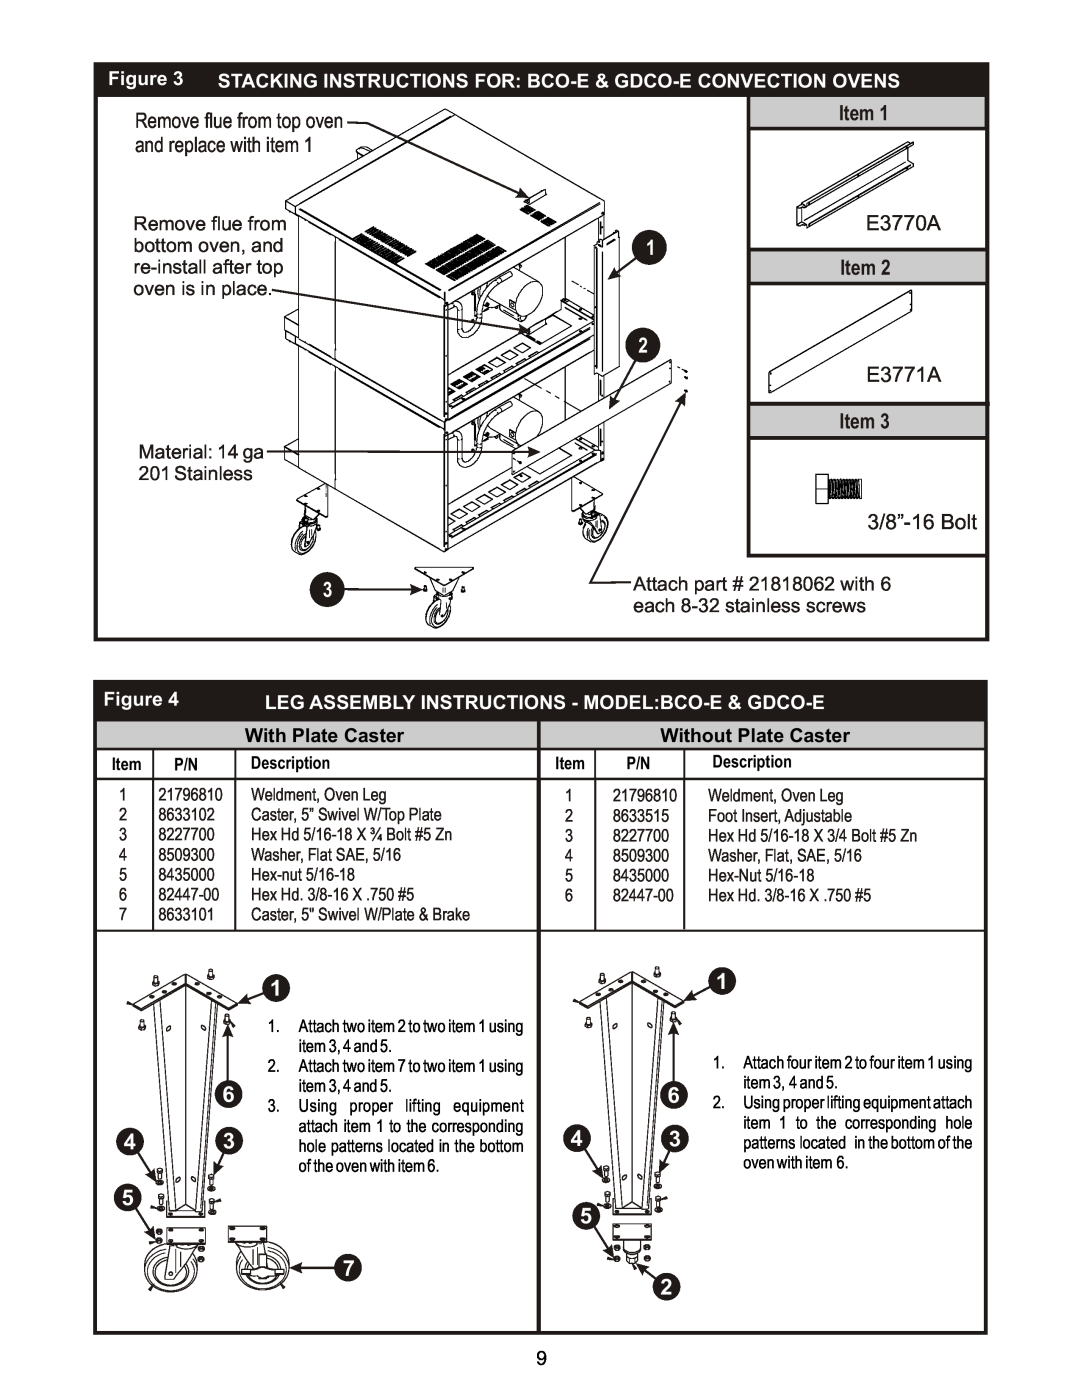 Bakers Pride Oven GDCO-E Stacking Instructions For Bco-E & Gdco-E Convection Ovens, Material 14 ga 201 Stainless, E3770A 